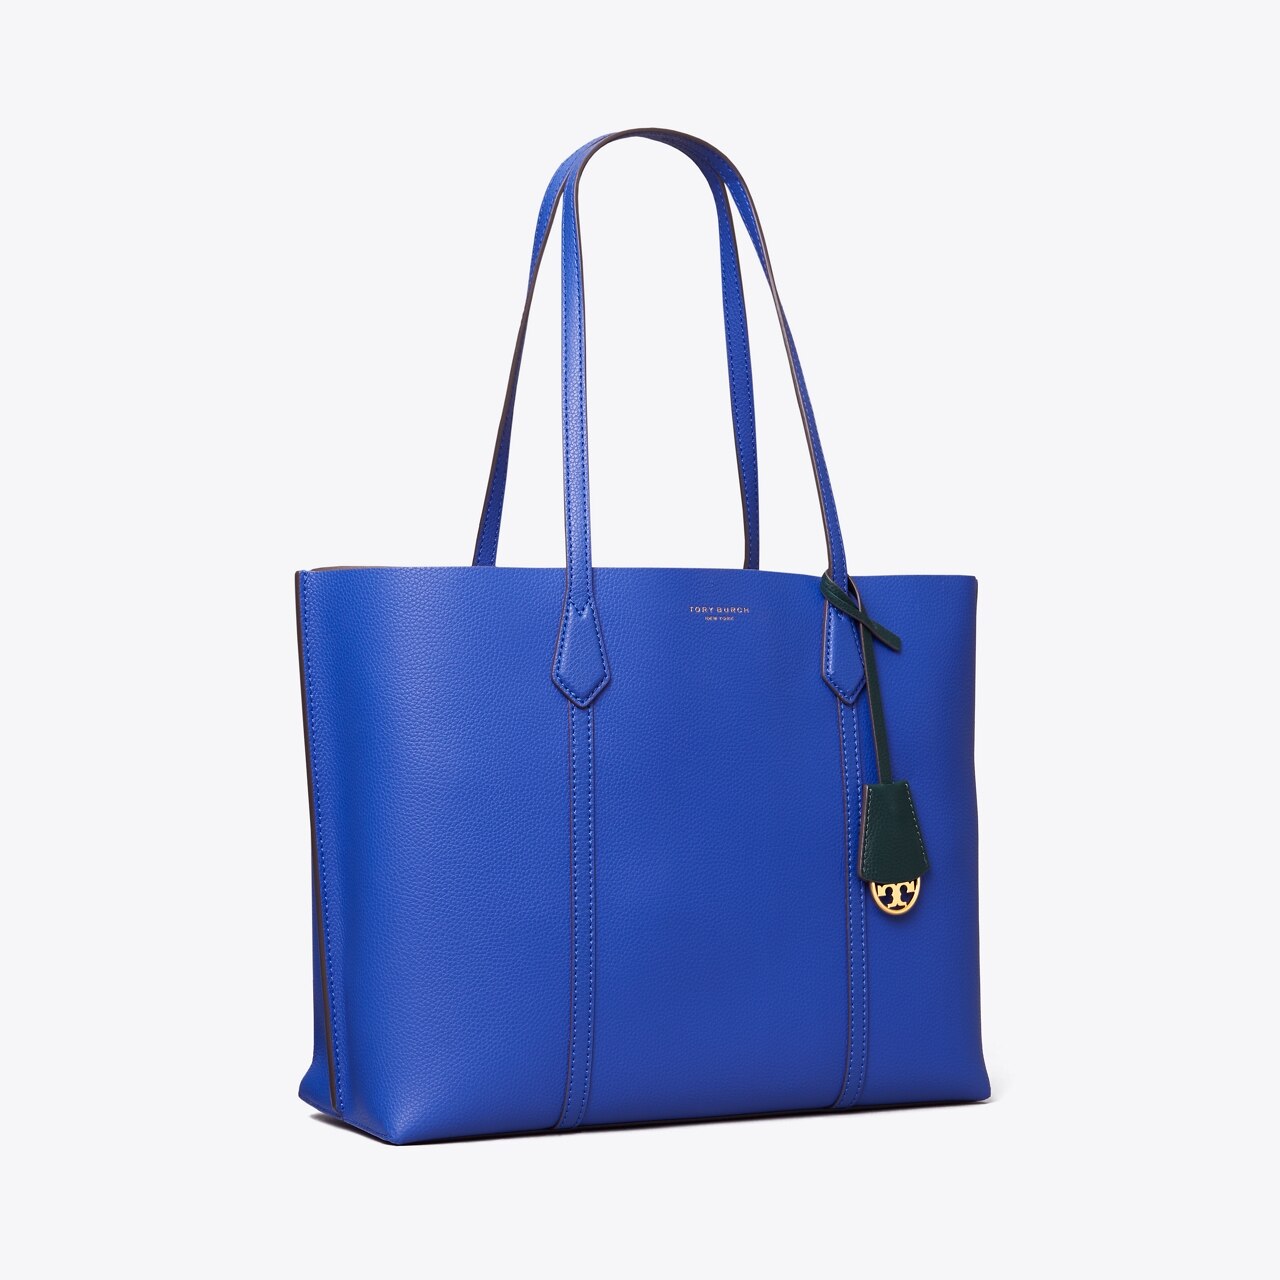 Tory Burch - The Perry Tote In our new fil coupe logo